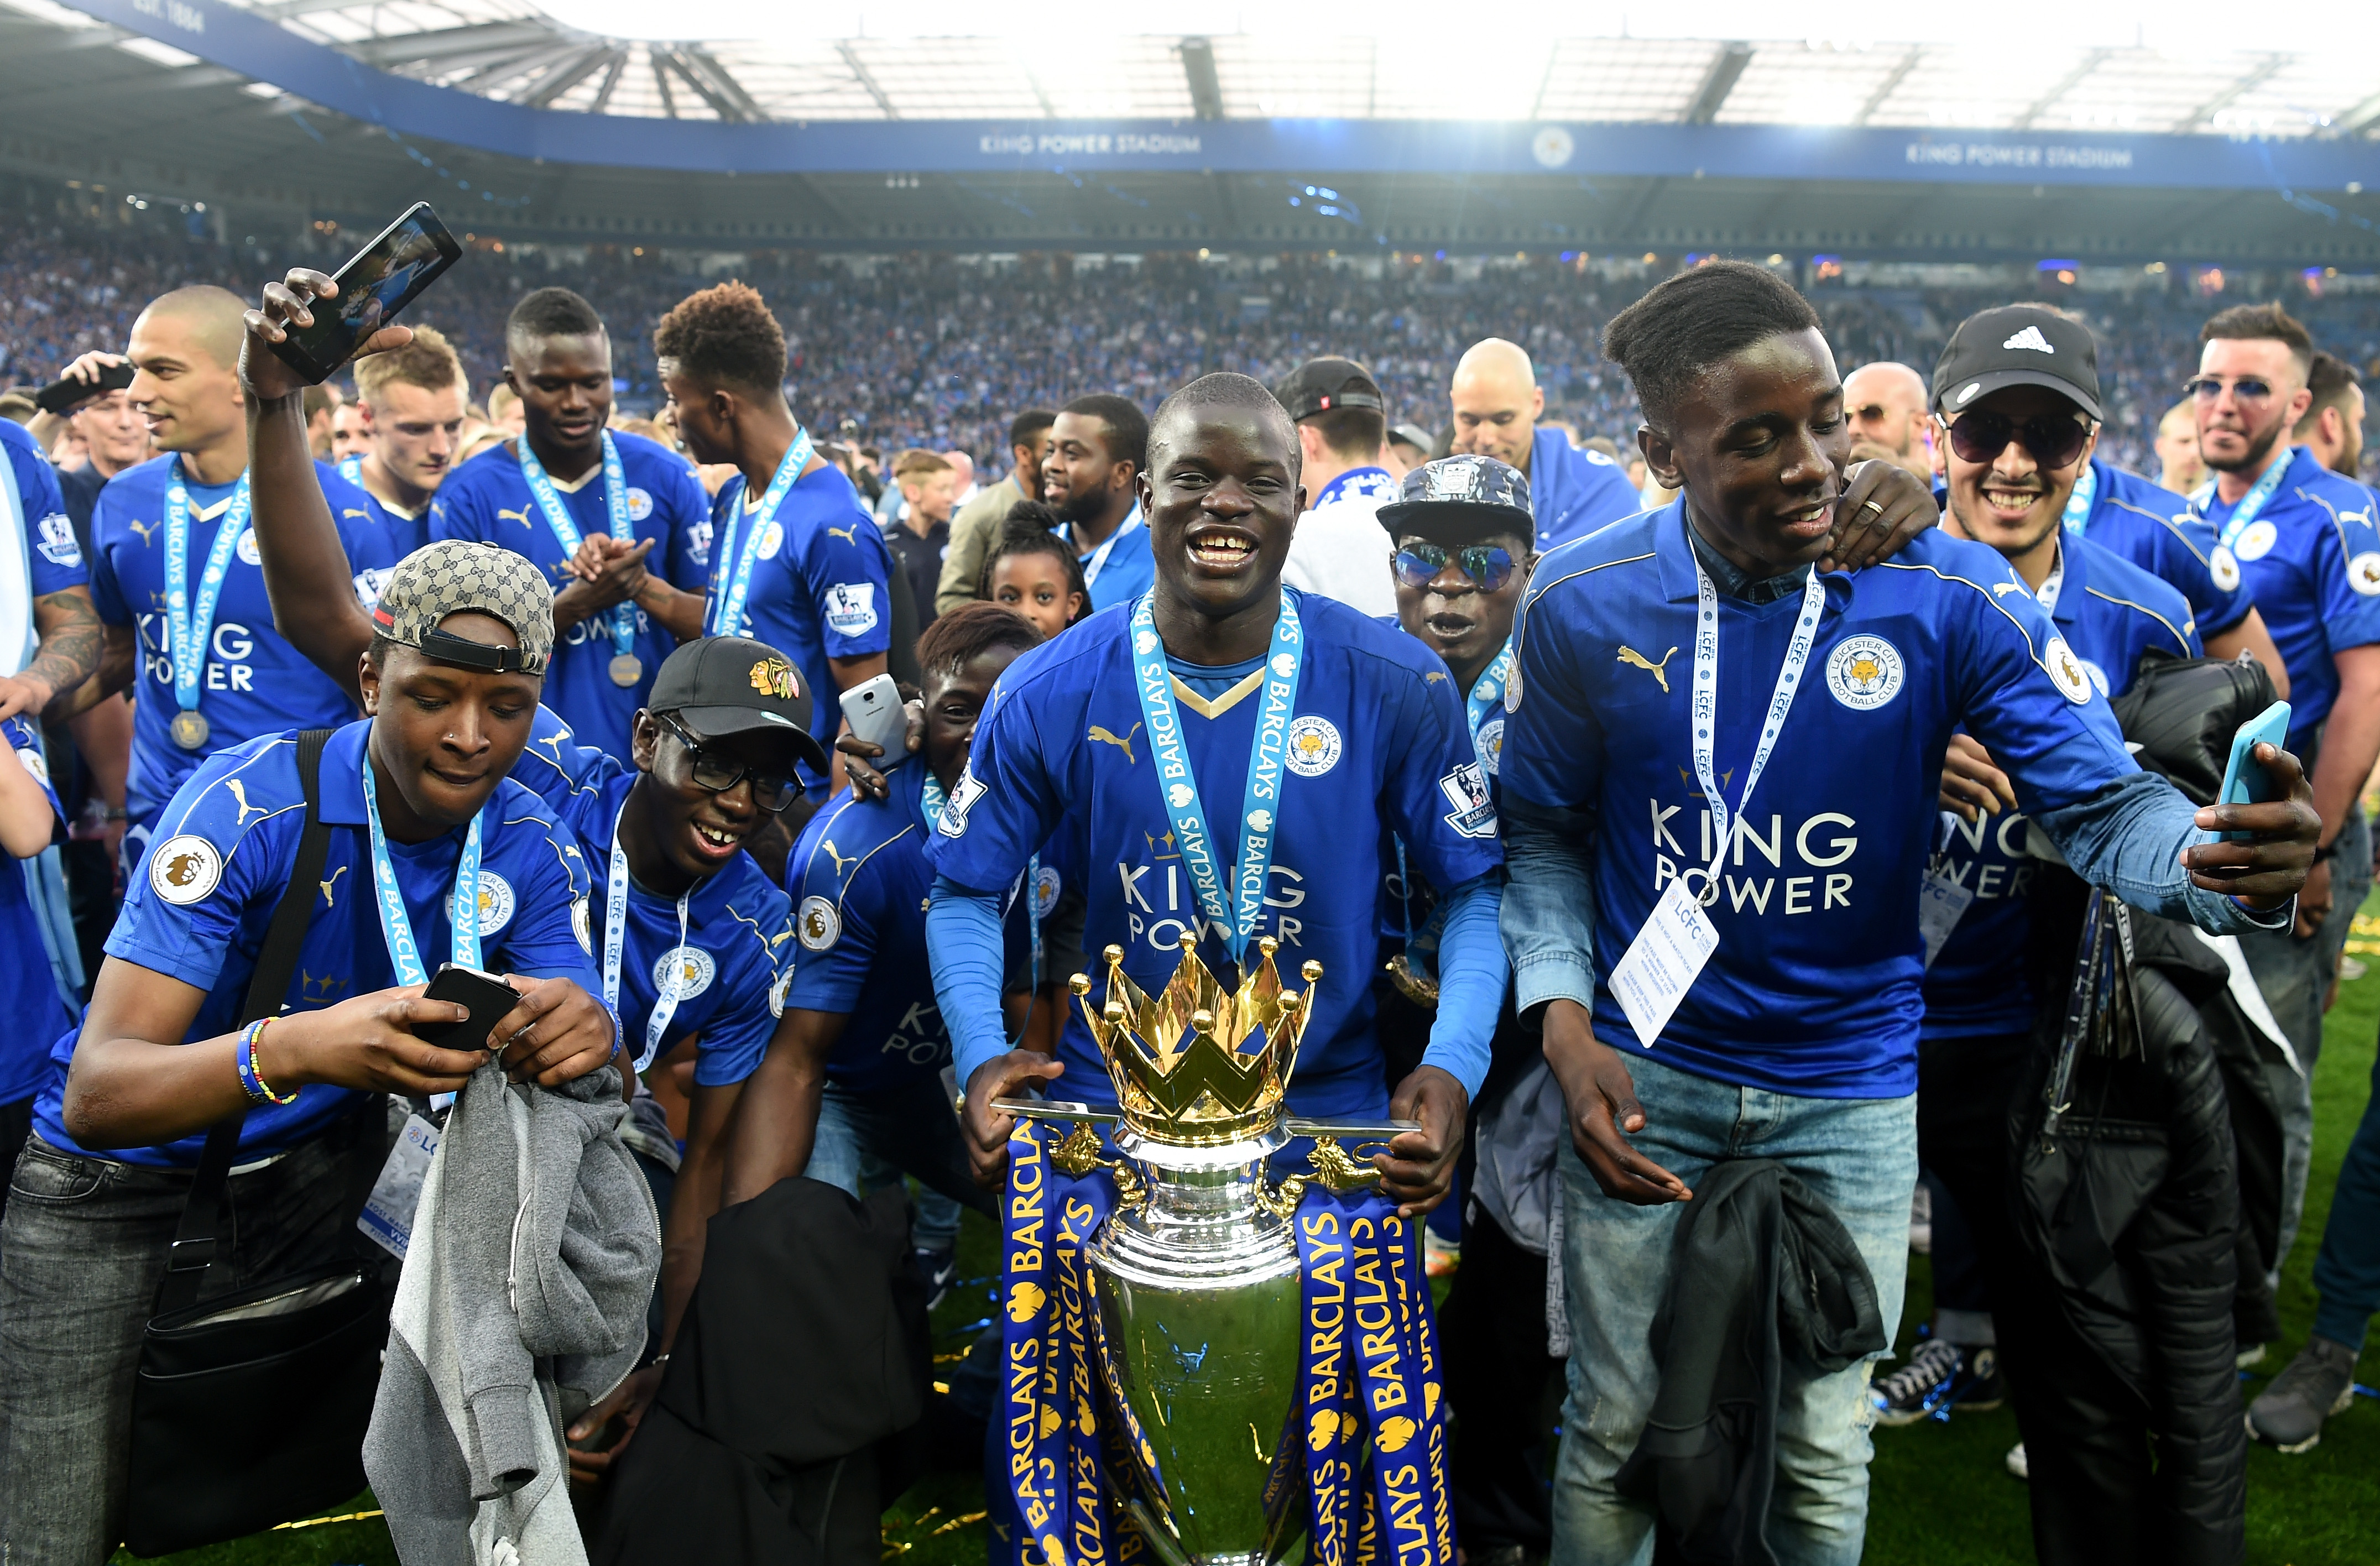 Kante is set to be the centre of attention as he faces his former club and former teammates in Jamie Vardy and Riyad Mahrez. (Picture Courtesy - AFP/Getty Images)